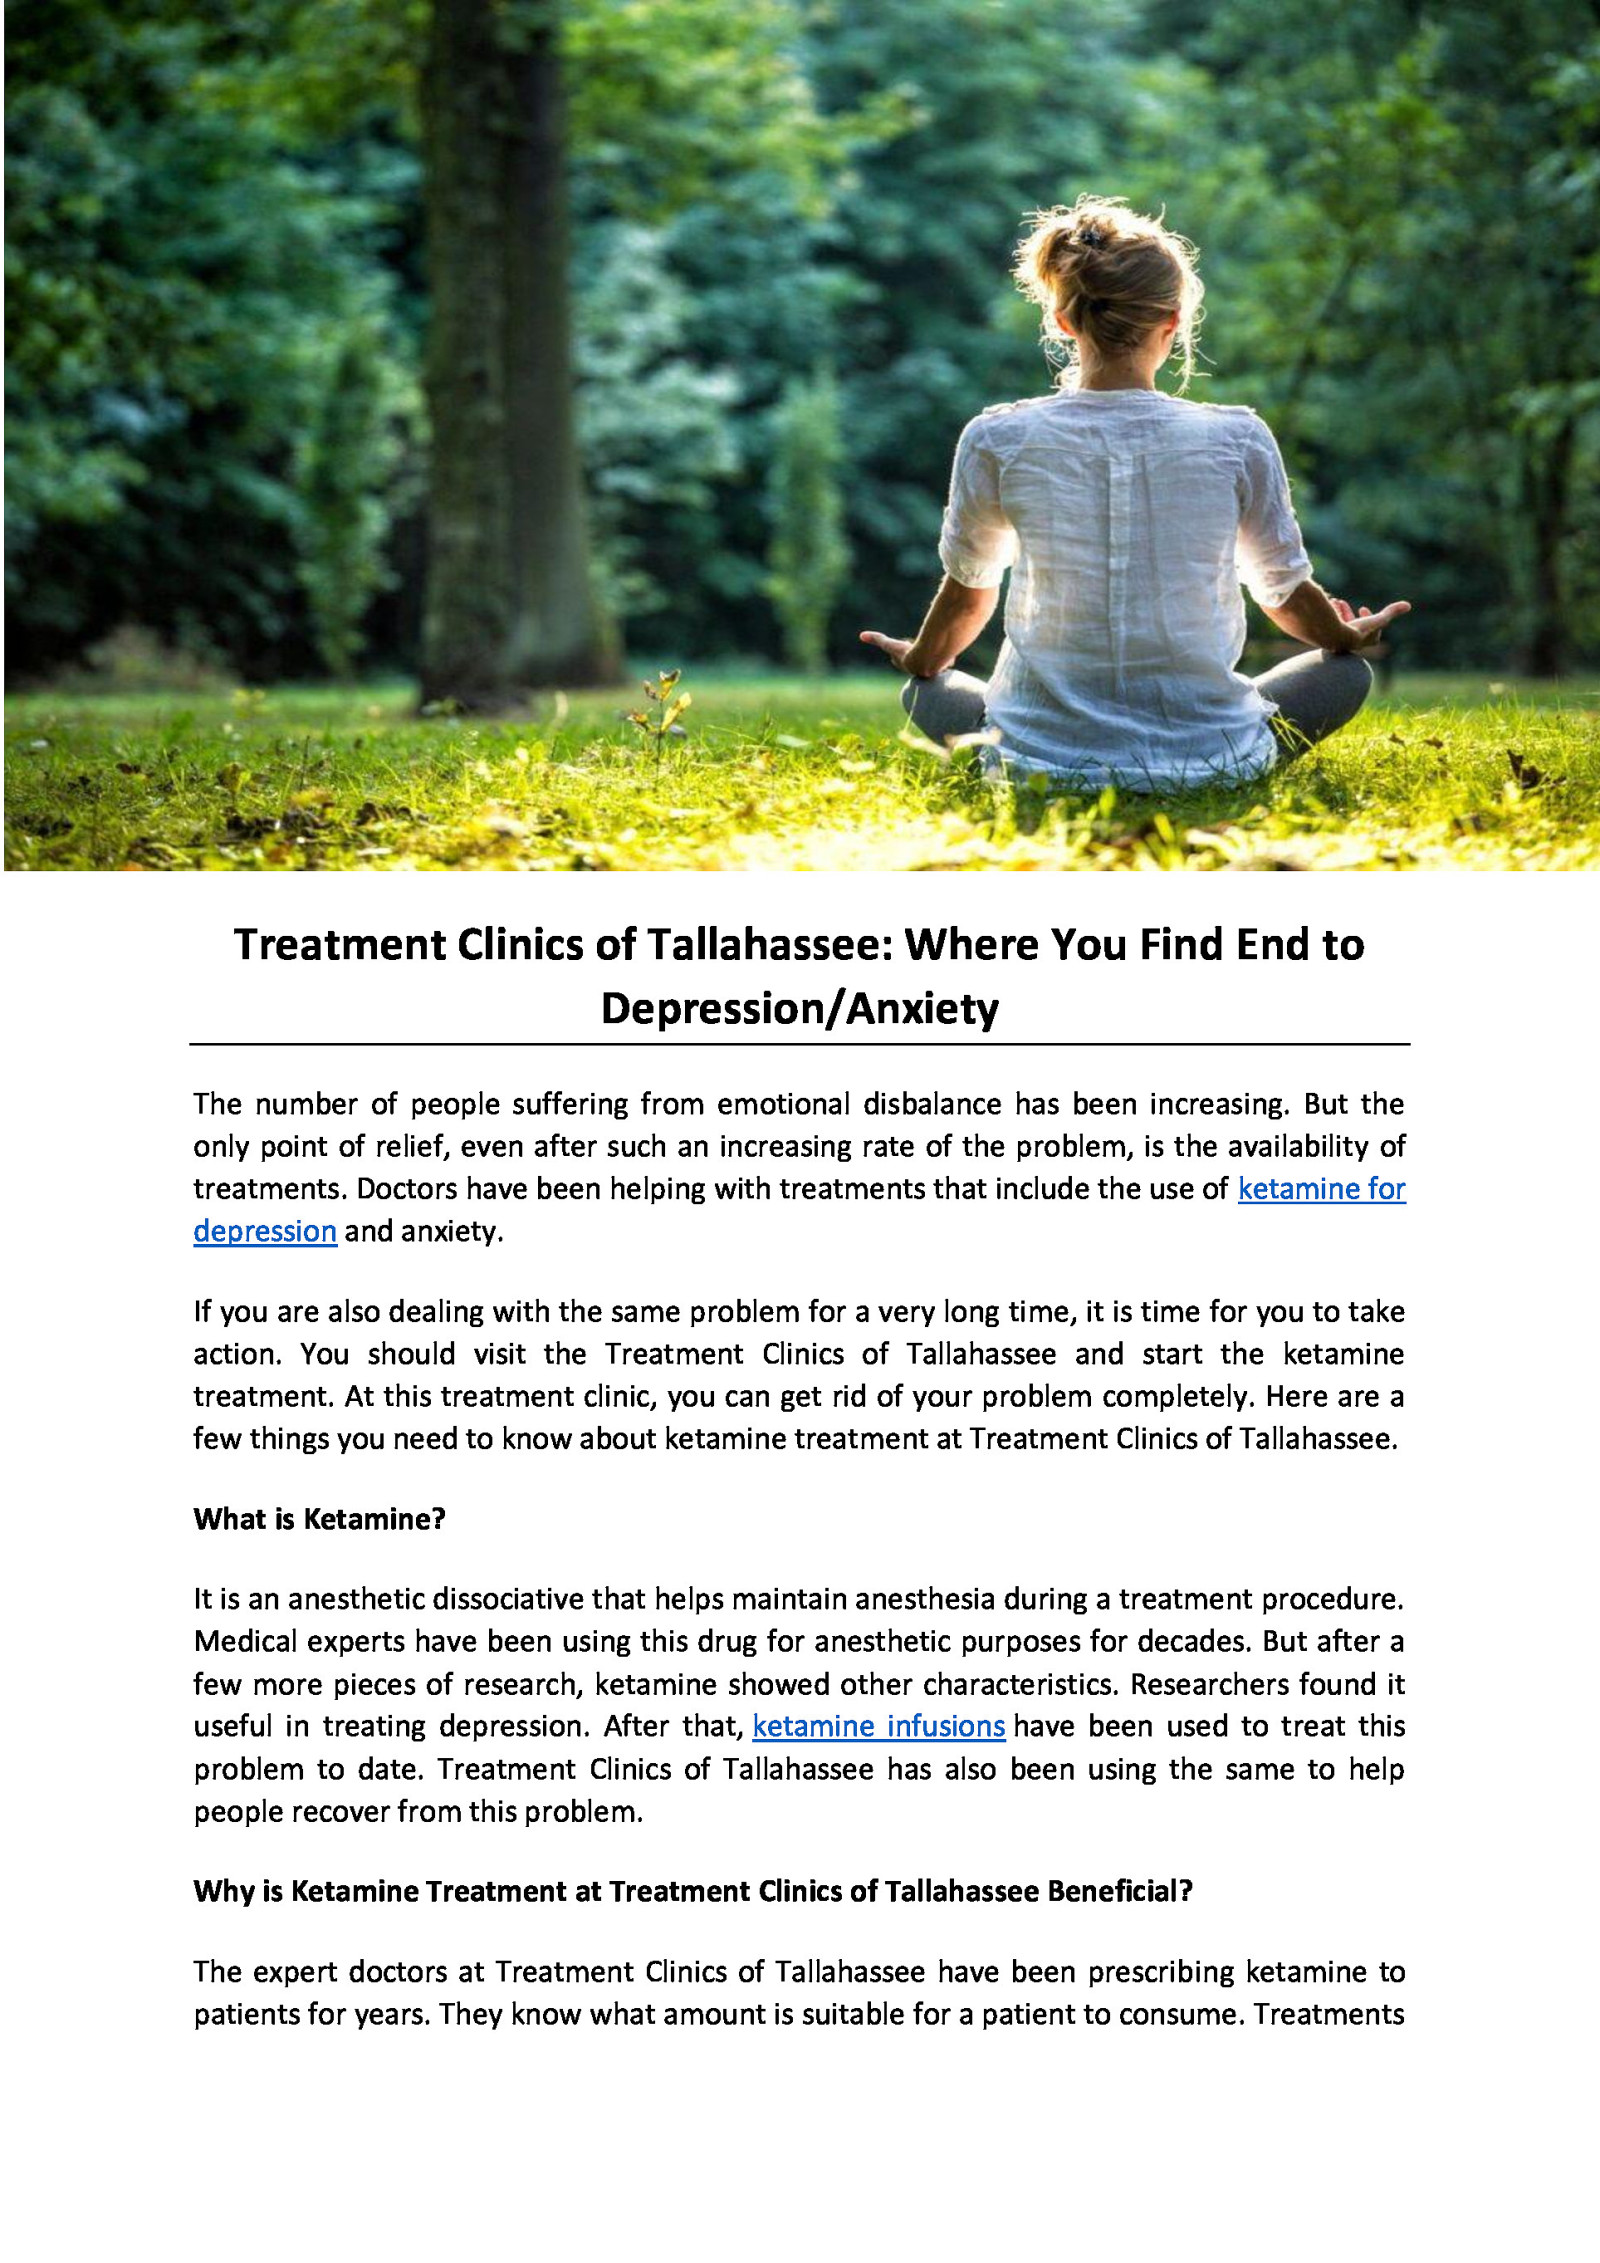 Treatment Clinics of Tallahassee: Where You Find End to Depression/Anxiety